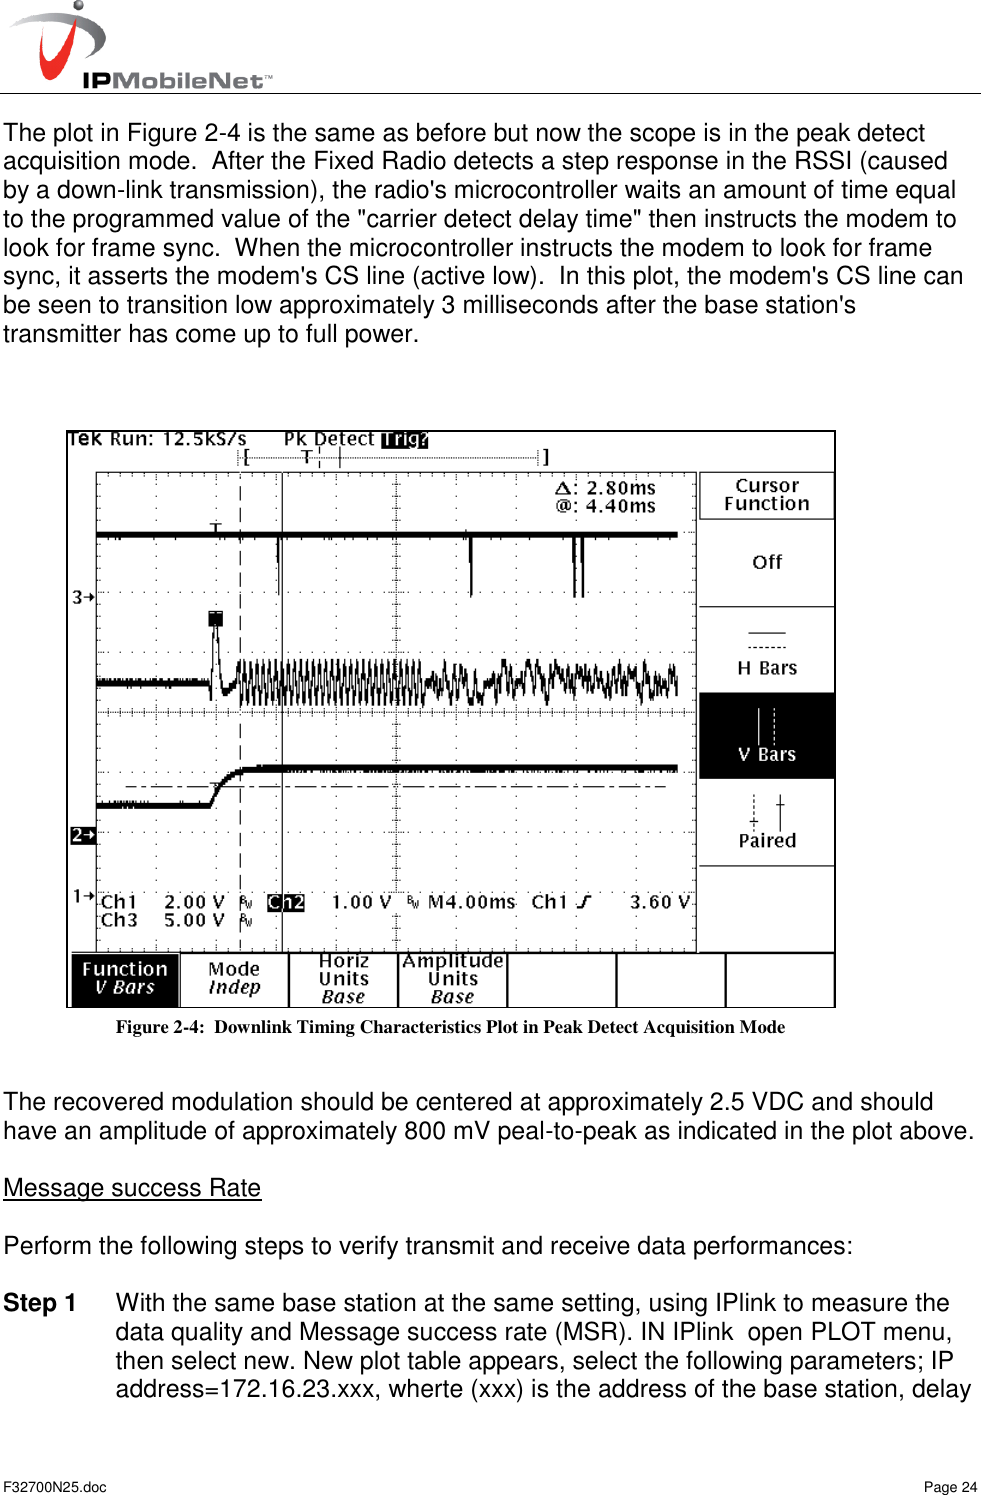   F32700N25.doc    Page 24 The plot in Figure 2-4 is the same as before but now the scope is in the peak detect acquisition mode.  After the Fixed Radio detects a step response in the RSSI (caused by a down-link transmission), the radio&apos;s microcontroller waits an amount of time equal to the programmed value of the &quot;carrier detect delay time&quot; then instructs the modem to look for frame sync.  When the microcontroller instructs the modem to look for frame sync, it asserts the modem&apos;s CS line (active low).  In this plot, the modem&apos;s CS line can be seen to transition low approximately 3 milliseconds after the base station&apos;s transmitter has come up to full power.      The recovered modulation should be centered at approximately 2.5 VDC and should have an amplitude of approximately 800 mV peal-to-peak as indicated in the plot above.  Message success Rate  Perform the following steps to verify transmit and receive data performances:  Step 1  With the same base station at the same setting, using IPlink to measure the data quality and Message success rate (MSR). IN IPlink  open PLOT menu,  then select new. New plot table appears, select the following parameters; IP address=172.16.23.xxx, wherte (xxx) is the address of the base station, delay Figure 2-4:  Downlink Timing Characteristics Plot in Peak Detect Acquisition Mode 